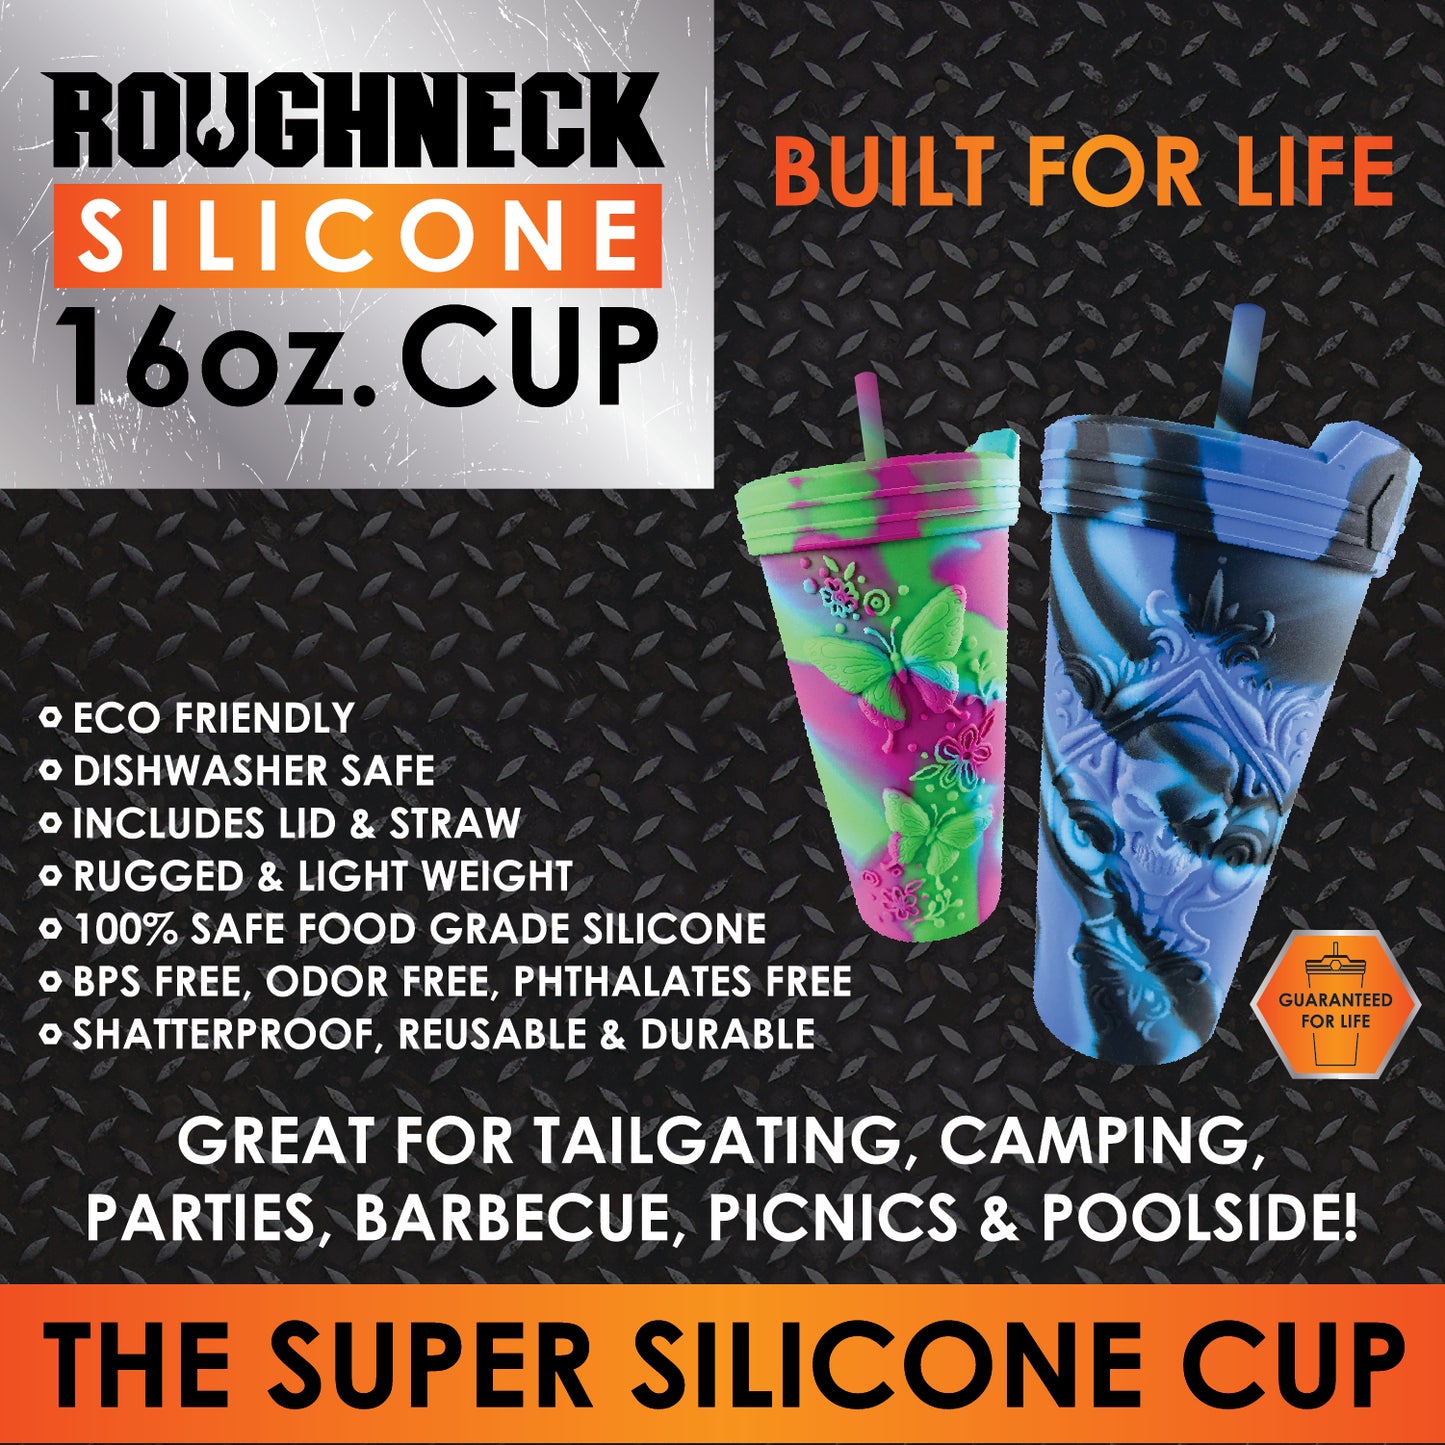 ITEM NUMBER 022911 ROUGHNECK SILICONE CUP 16OZ +LID 6 PIECES PER DISPLAY